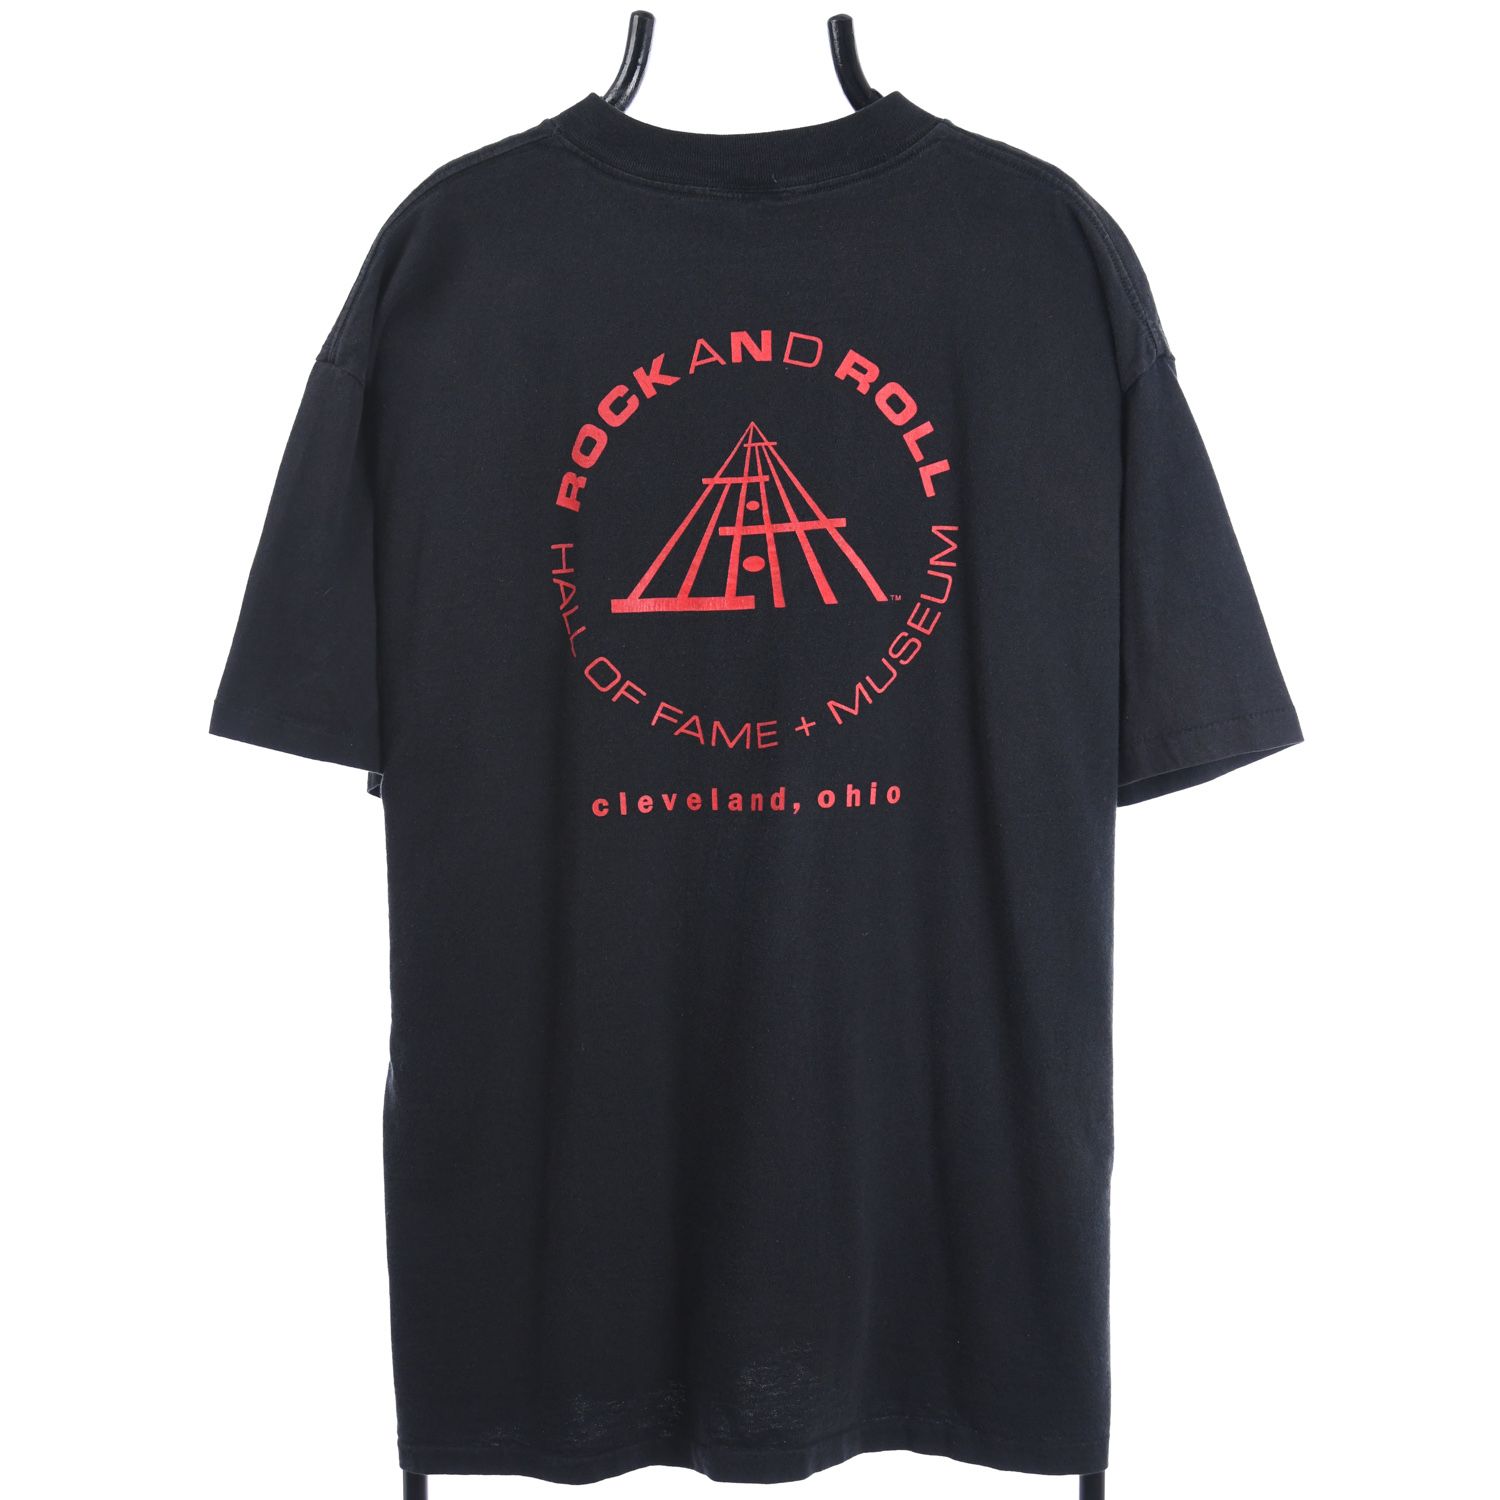 Rock and Roll Hall of Fame Museum 1990s T-Shirt